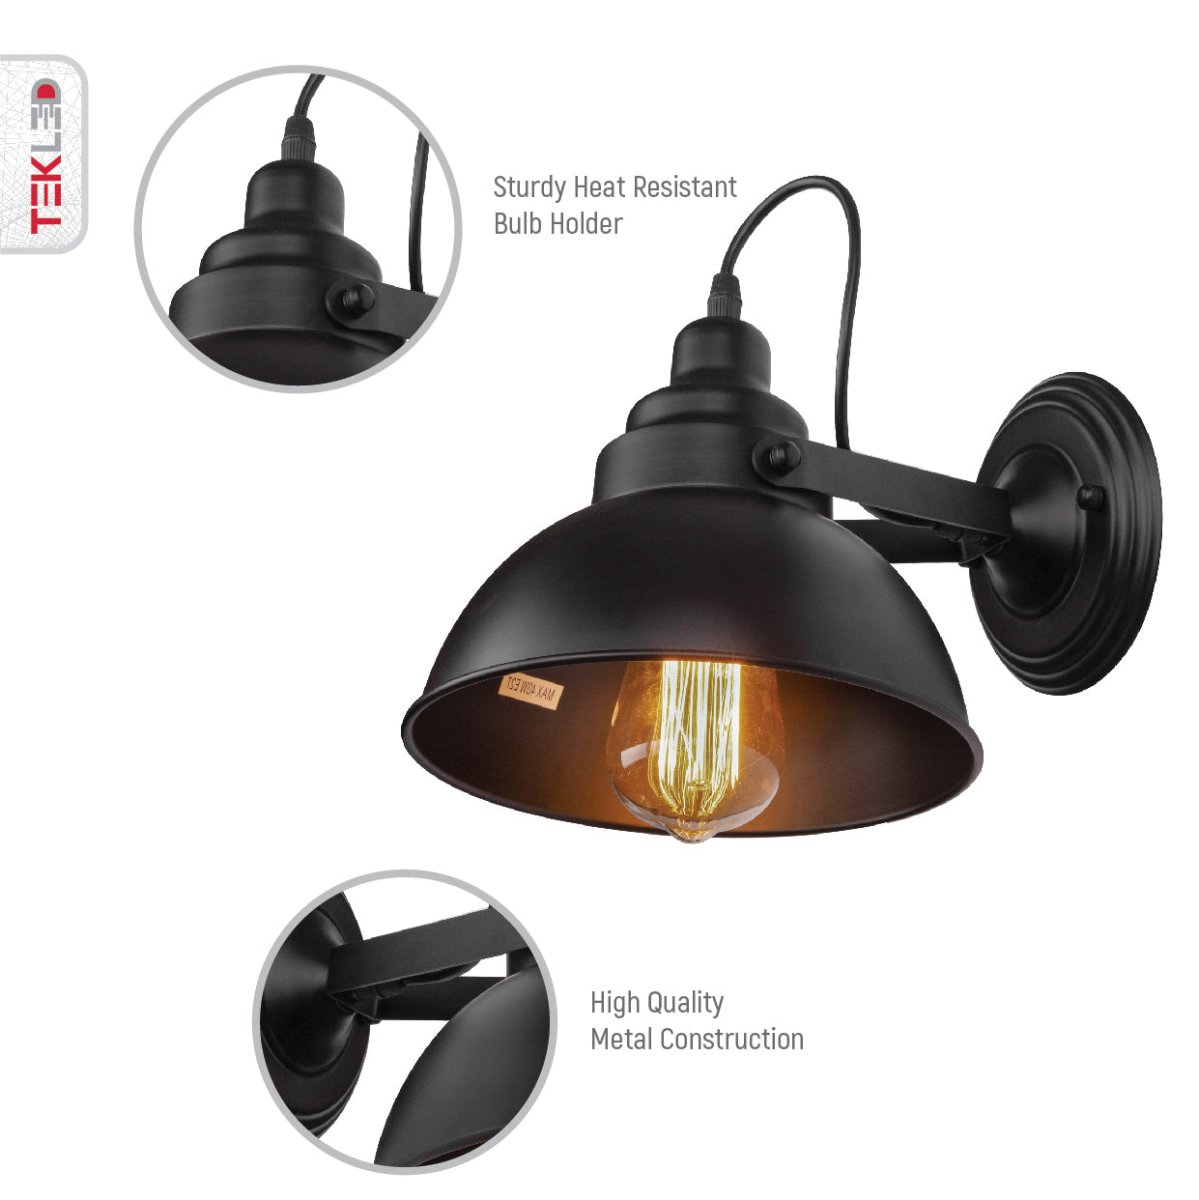 Detailed images of Black Metal Hinged Dome Wall Light with E27 Fitting